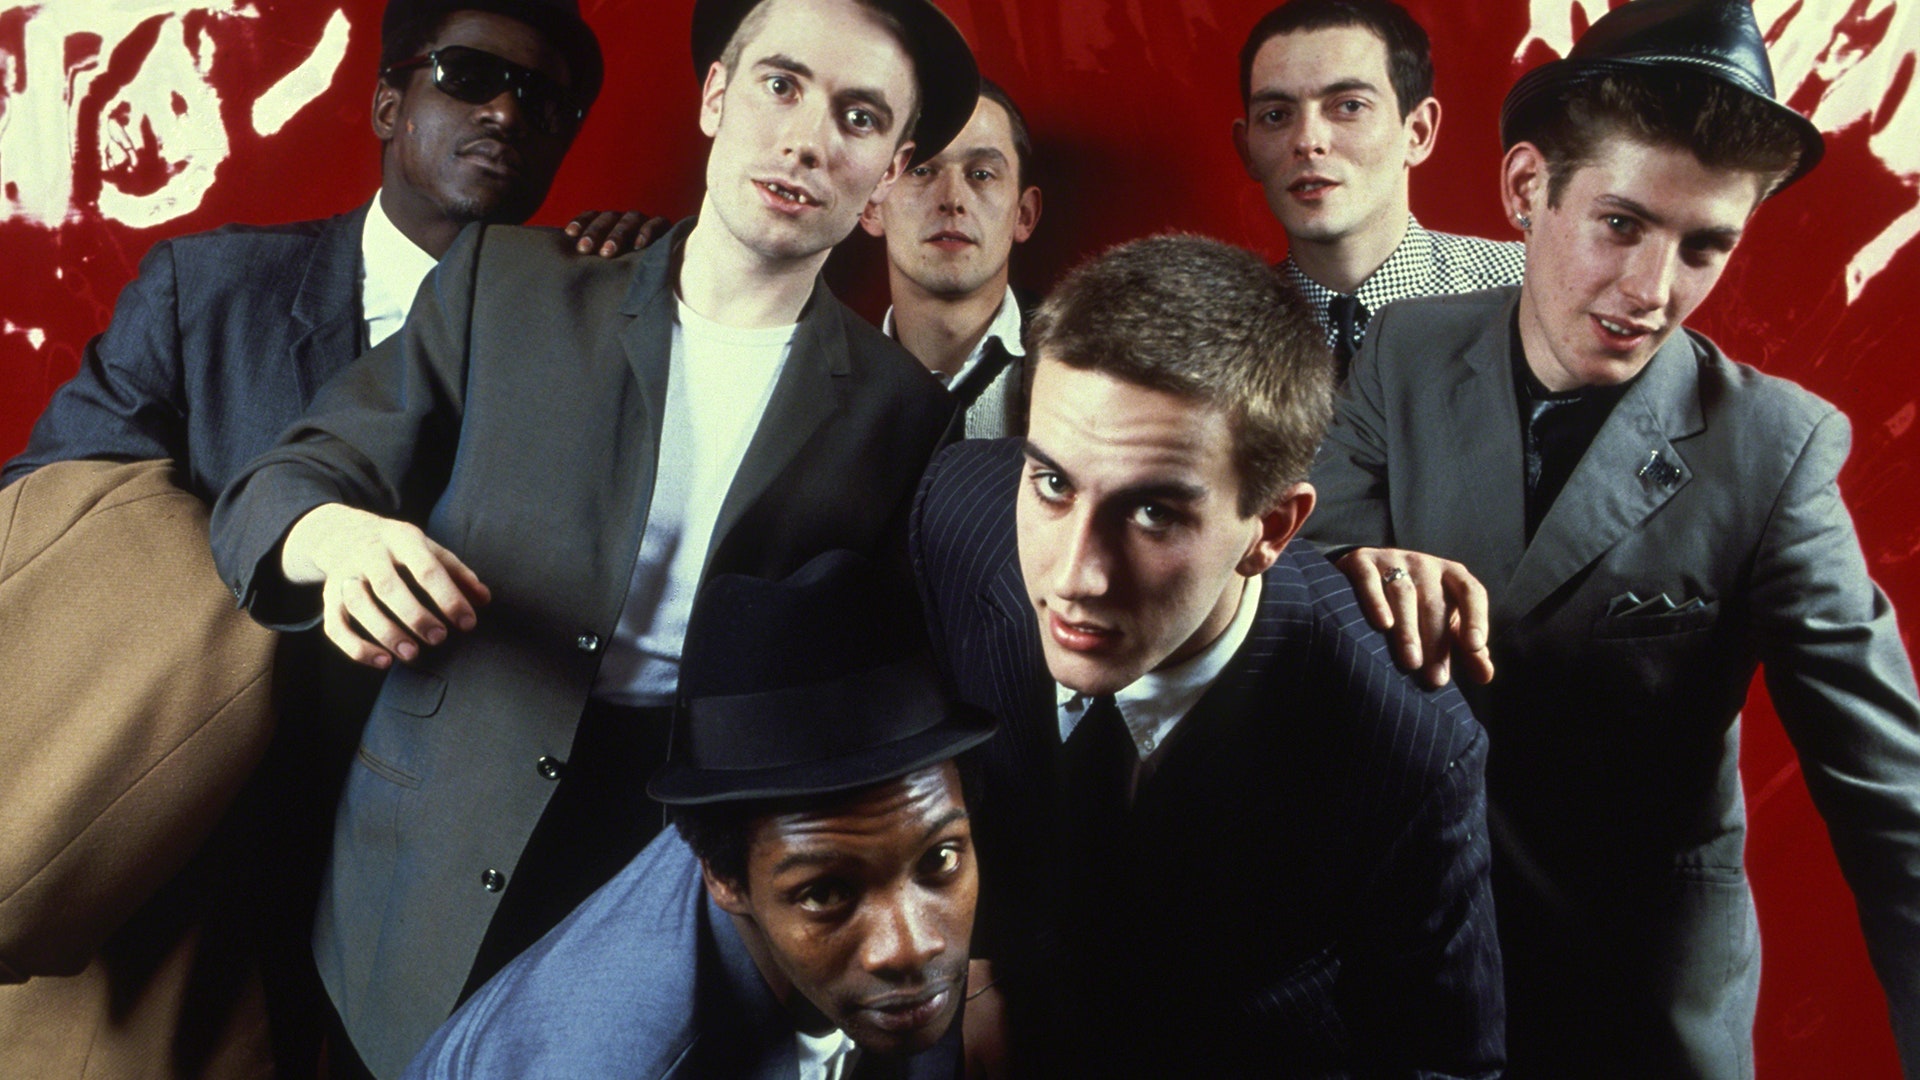 Why The Specials' 'Ghost Town' eerily resonates today